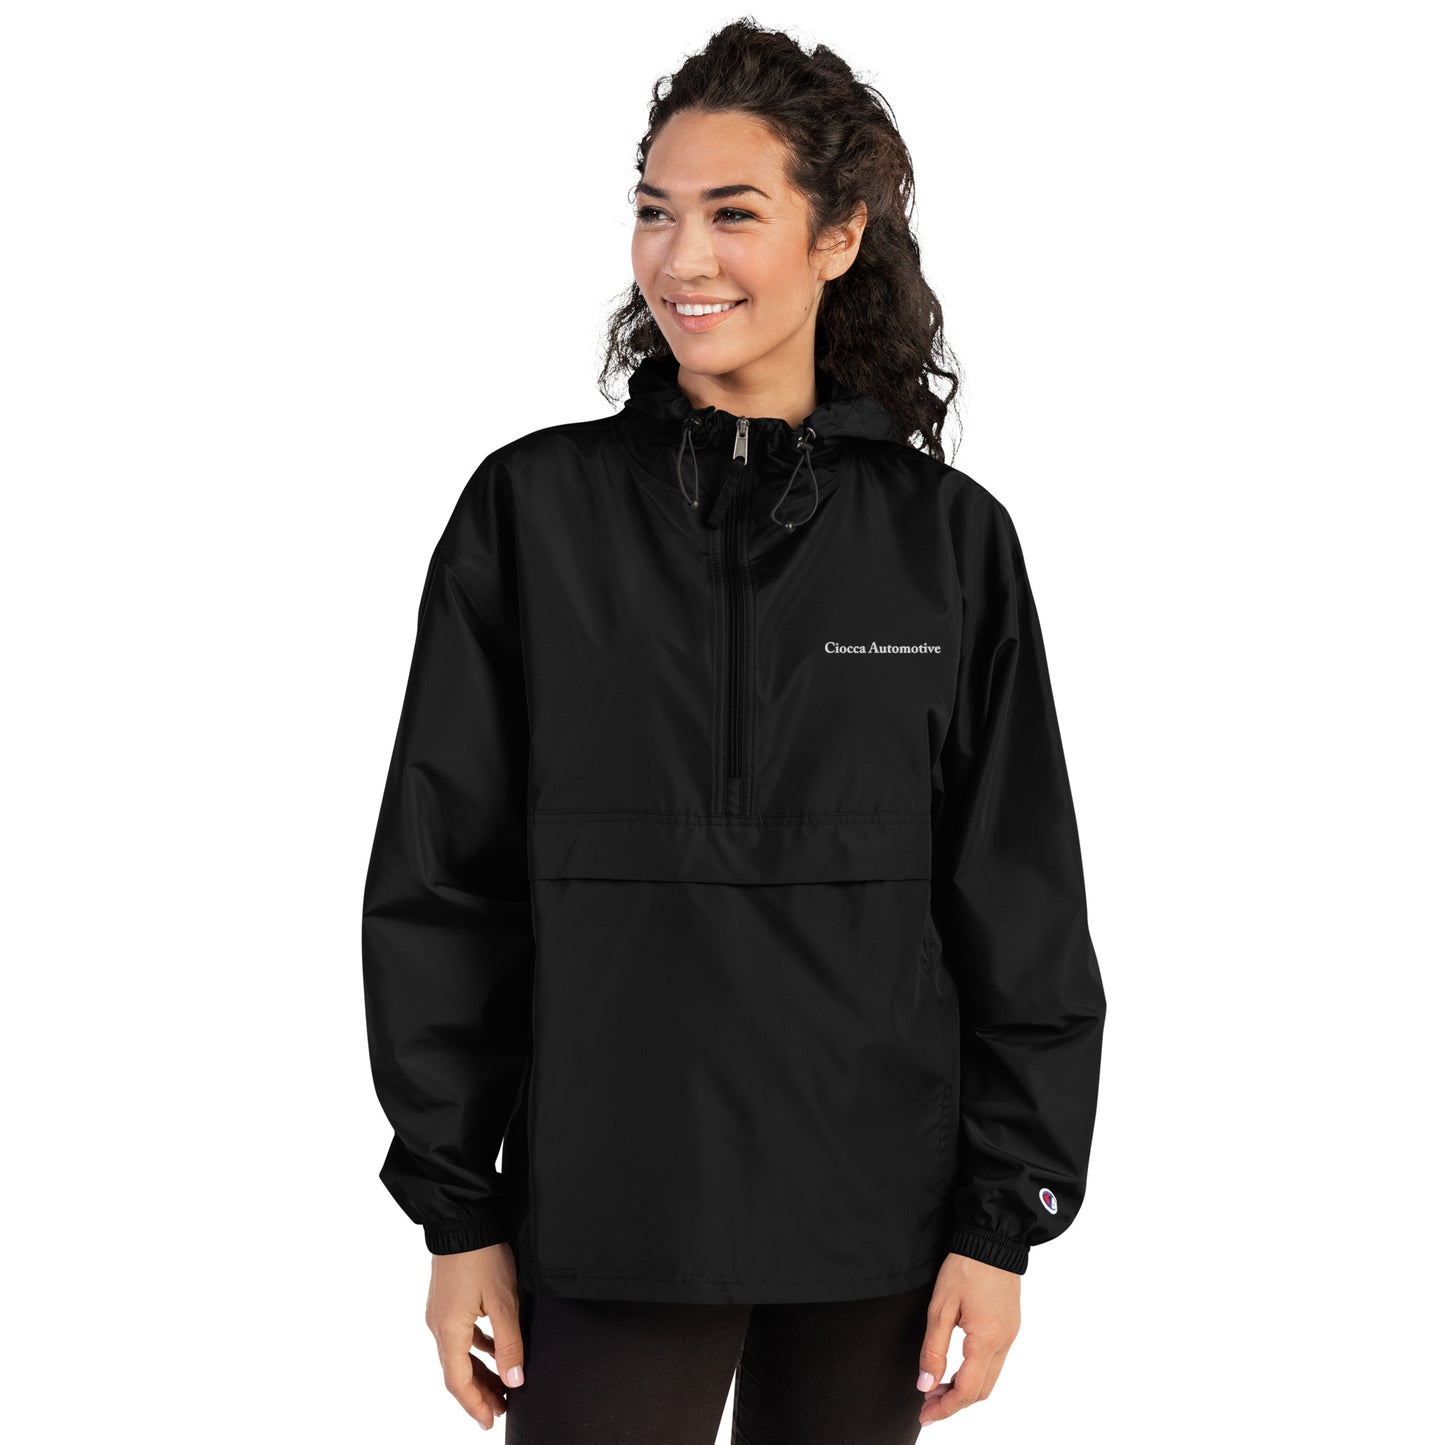 Embroidered Champion Packable Jacket - Ciocca